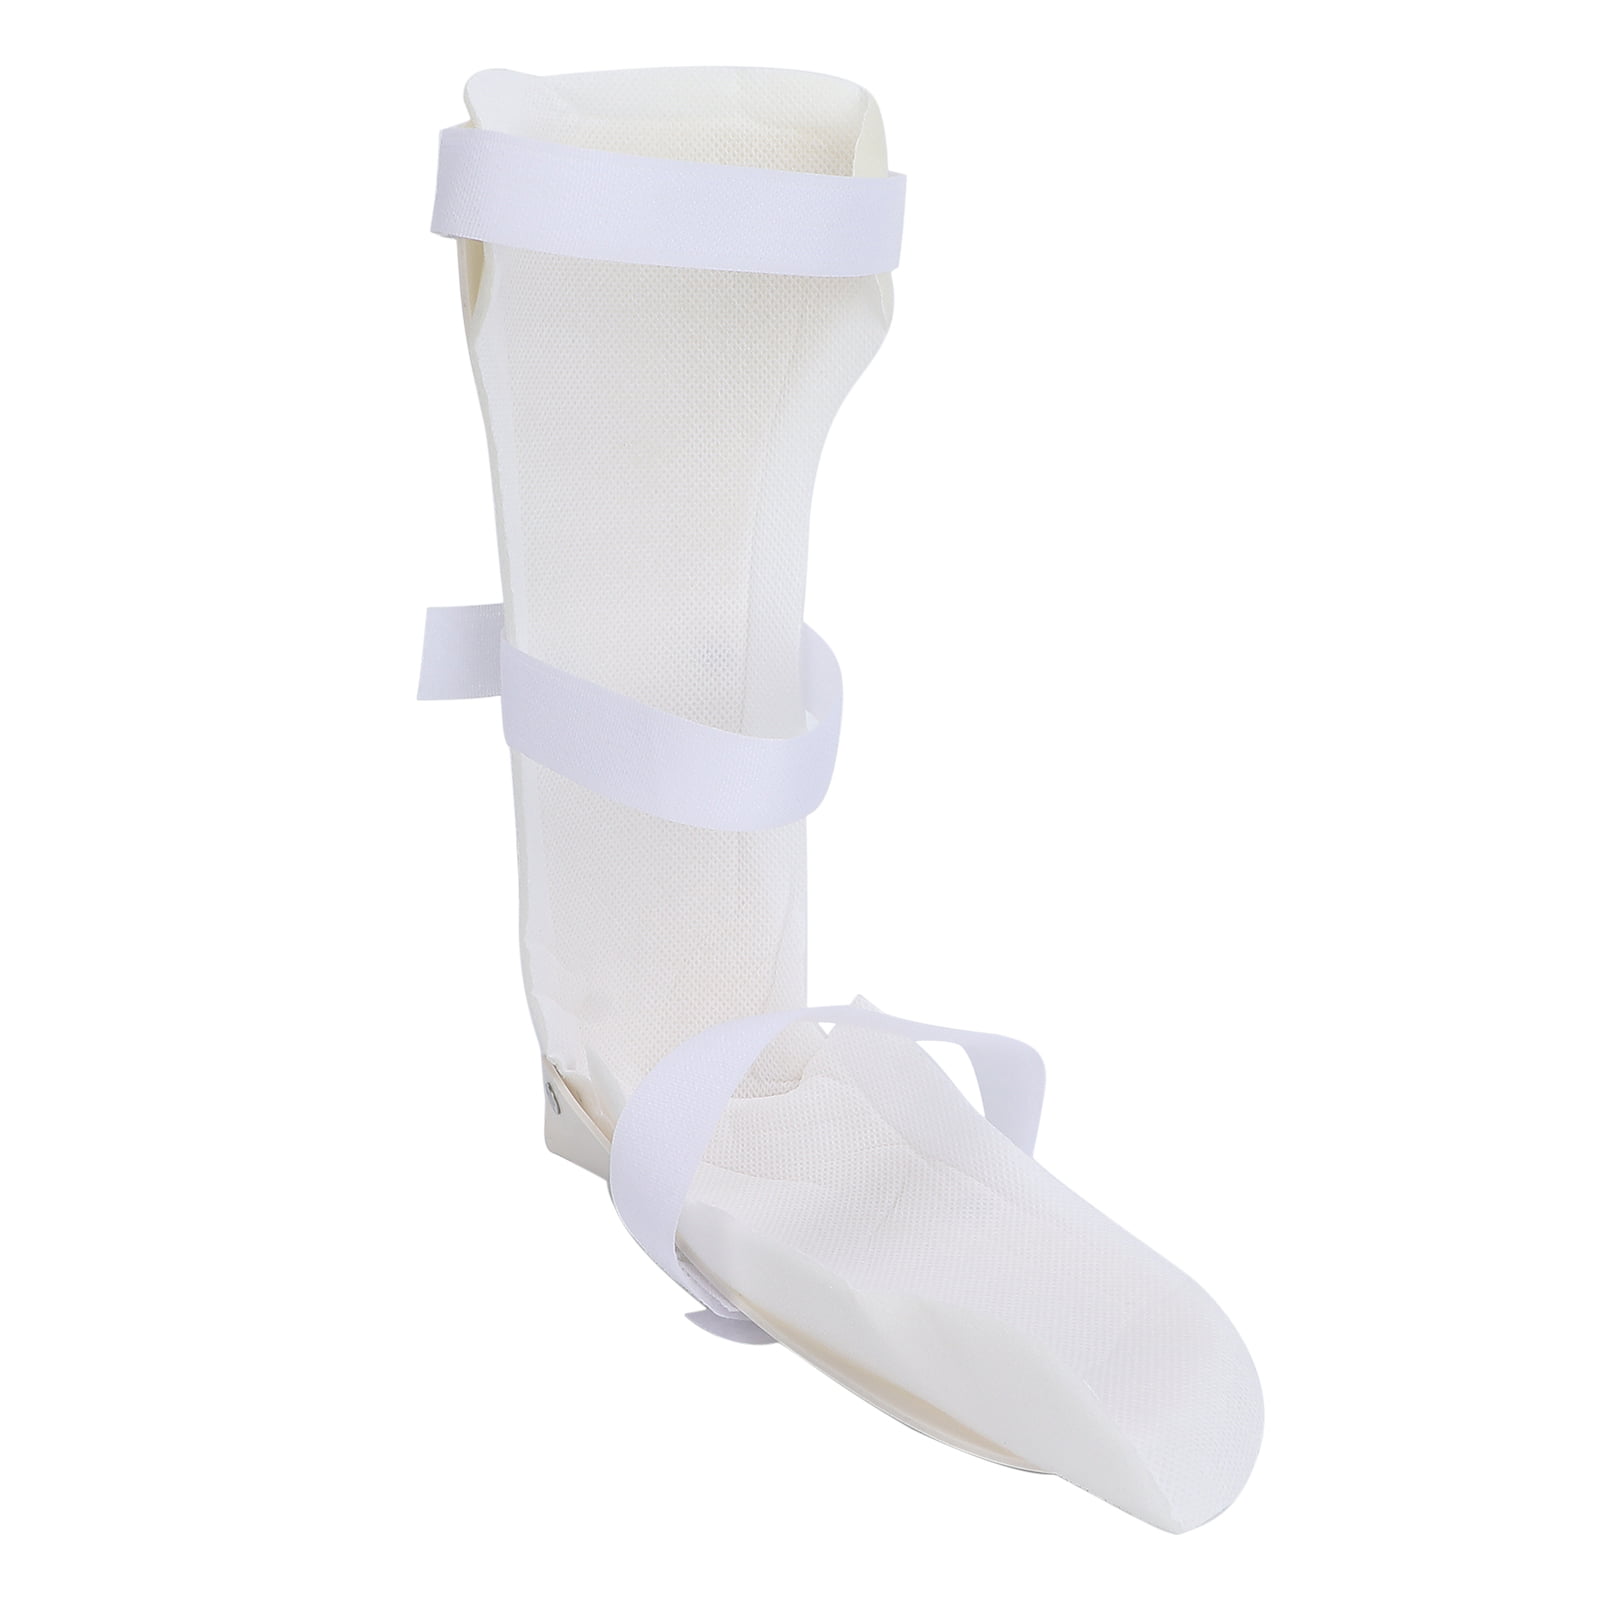 Domqga Ankle Correction Brace, Foot Orthosis Keeping Foot In Straight ...